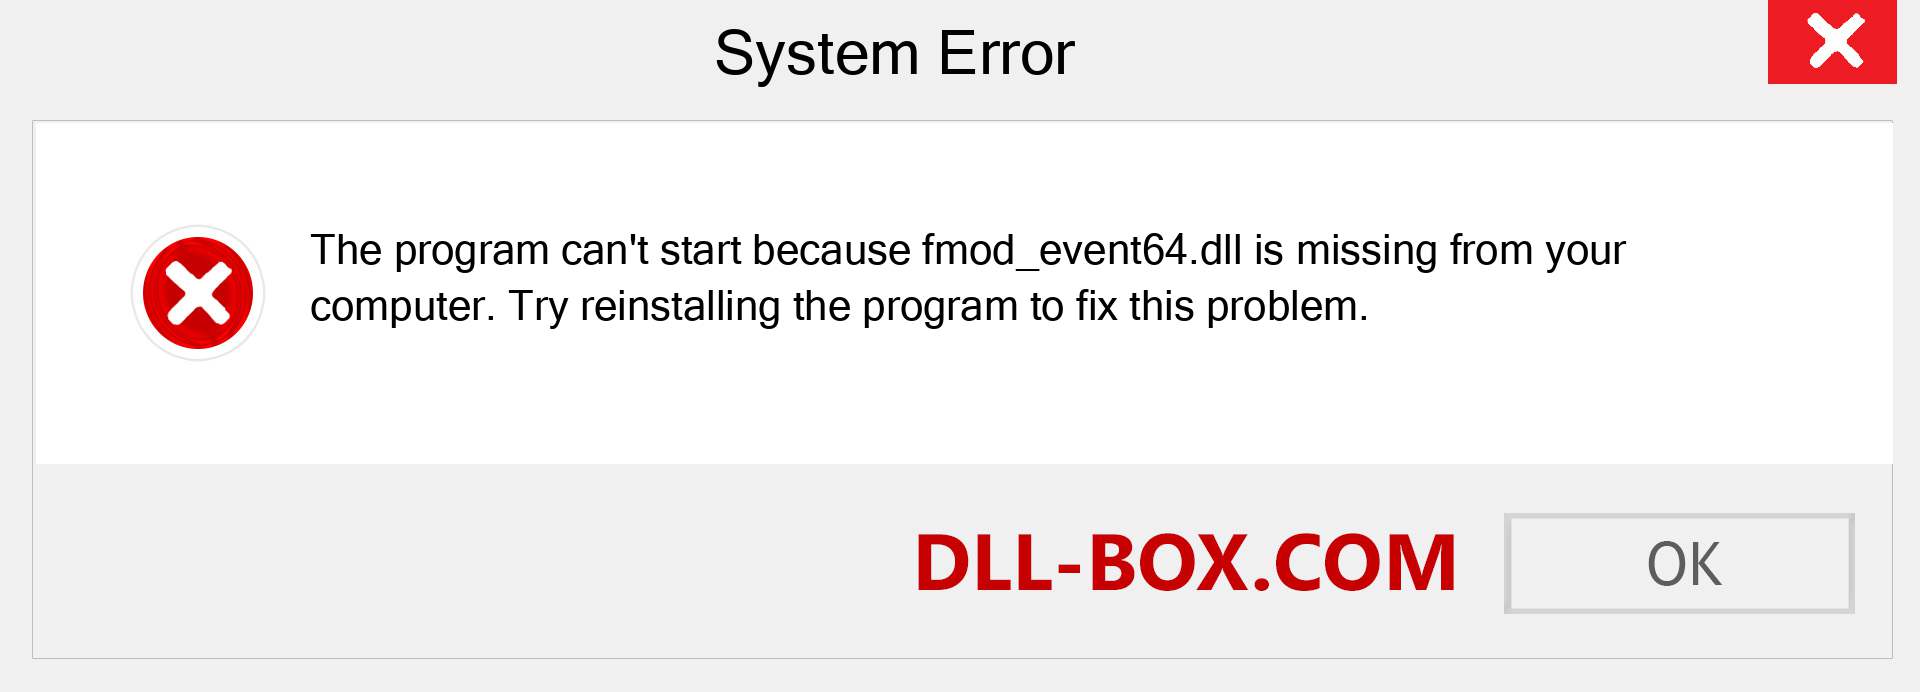  fmod_event64.dll file is missing?. Download for Windows 7, 8, 10 - Fix  fmod_event64 dll Missing Error on Windows, photos, images